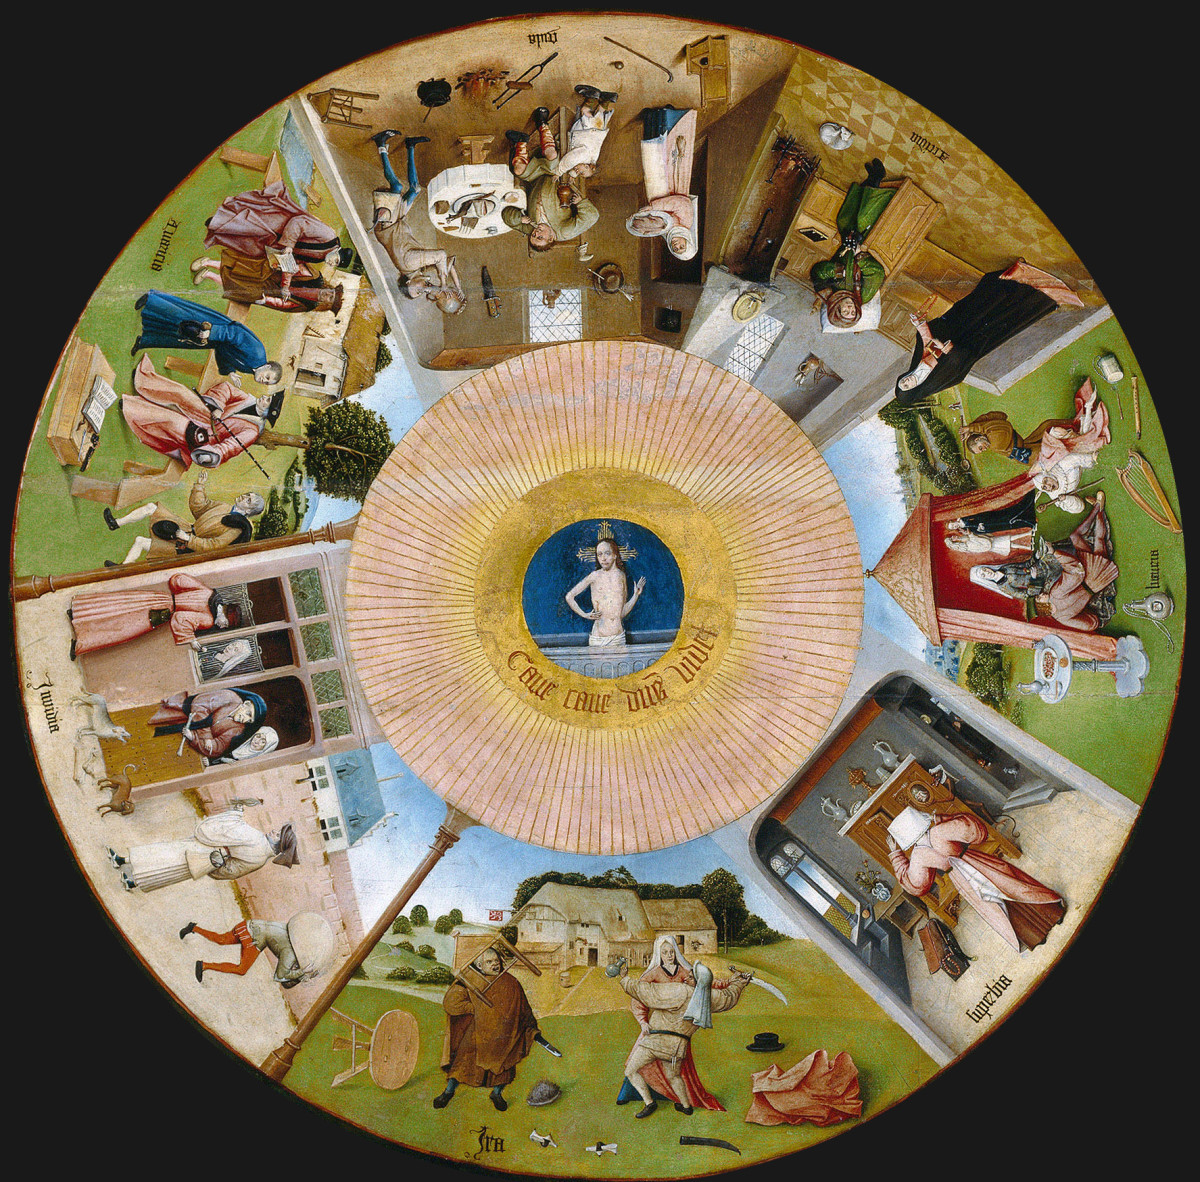 Does this painting attributed to Hieronymus Bosch (~1500) depict a wheel of sin or fortune?